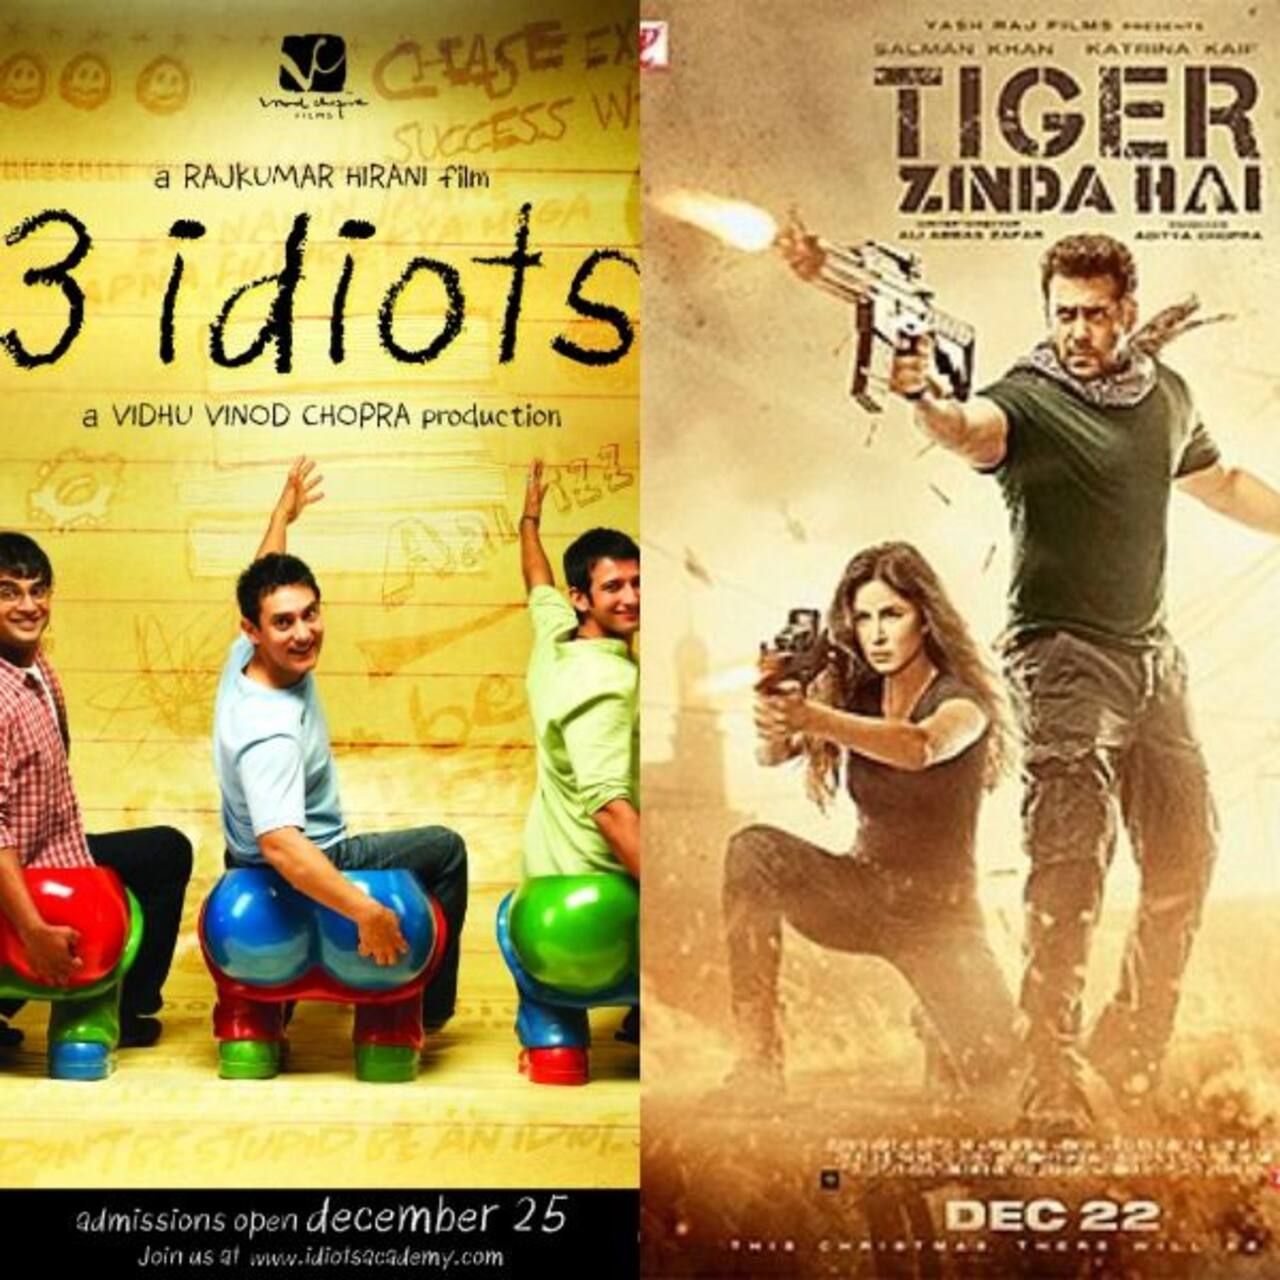 From 3 Idiots to Tiger Zinda Hai: 5 films which made Christmas merrier at the box office